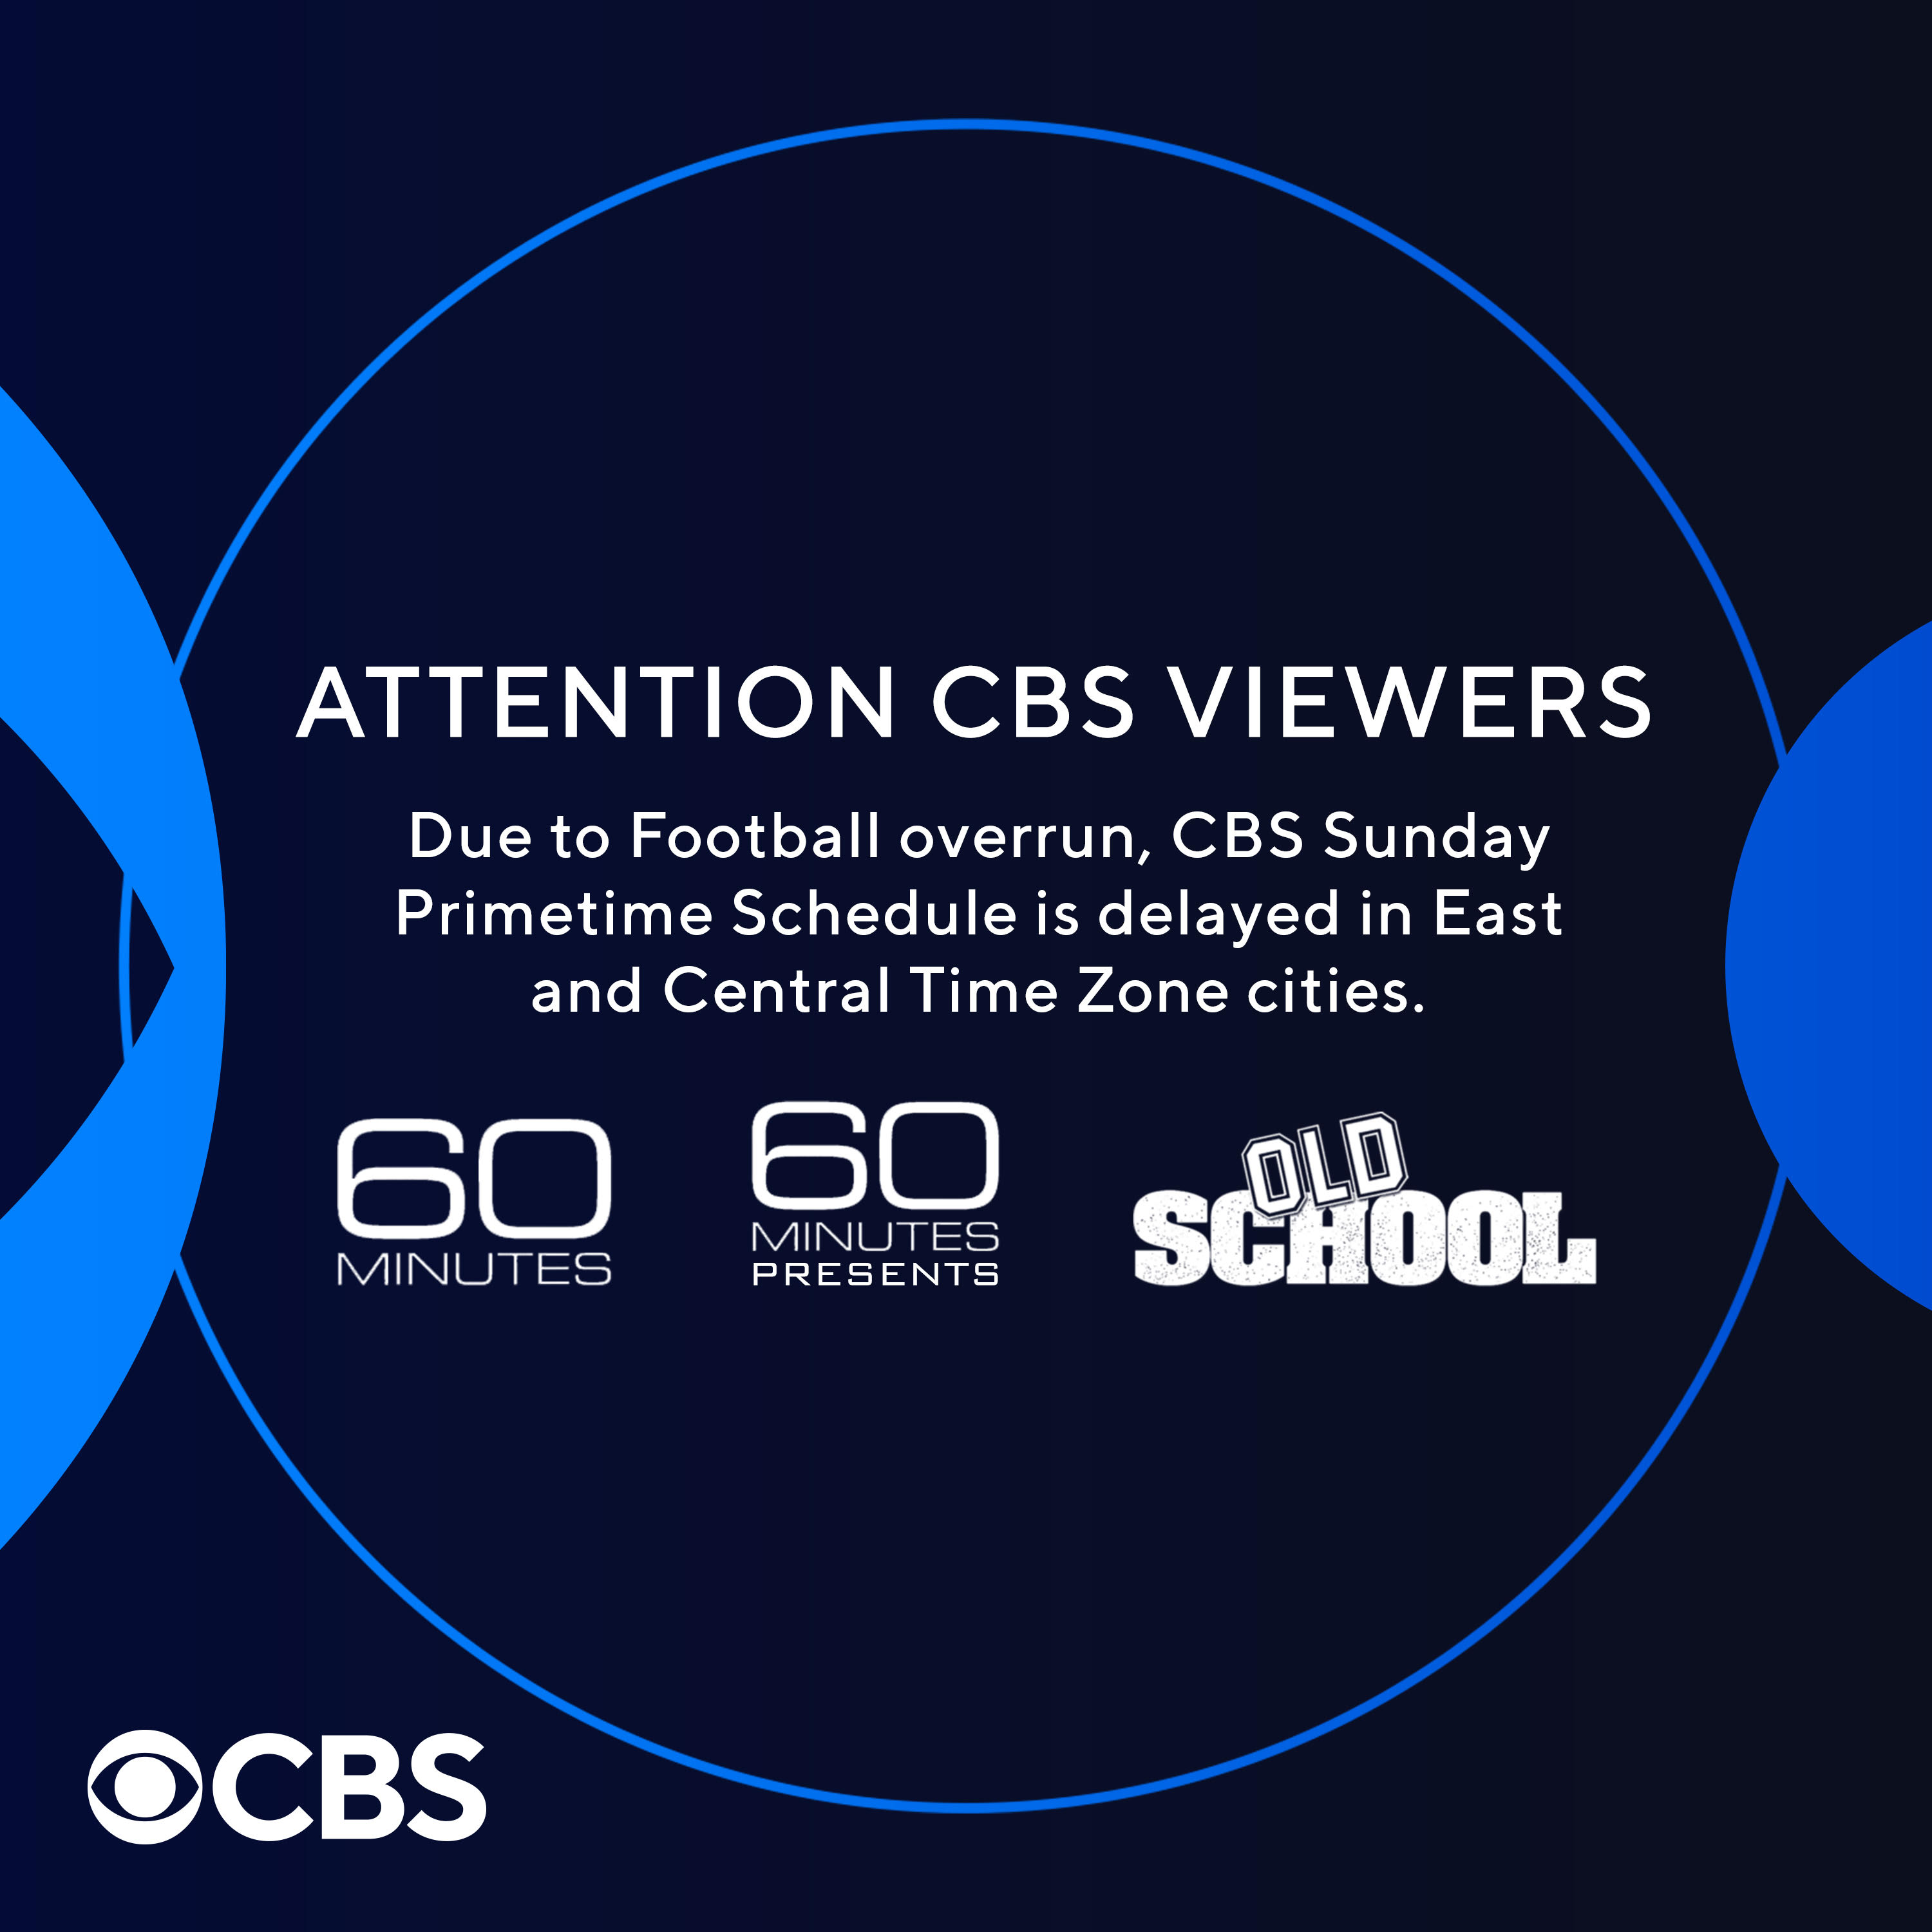 CBS on Twitter: "Due to #NFL football running long, new start times for #CBS Sunday night shows for Time Zone viewers ONLY. #60Minutes 7:42ET/6:42CT #60MinutesPresents 8:42ET/7:42CT #CBSMovieNight 9:42ET/8:42CT “Old School” ...